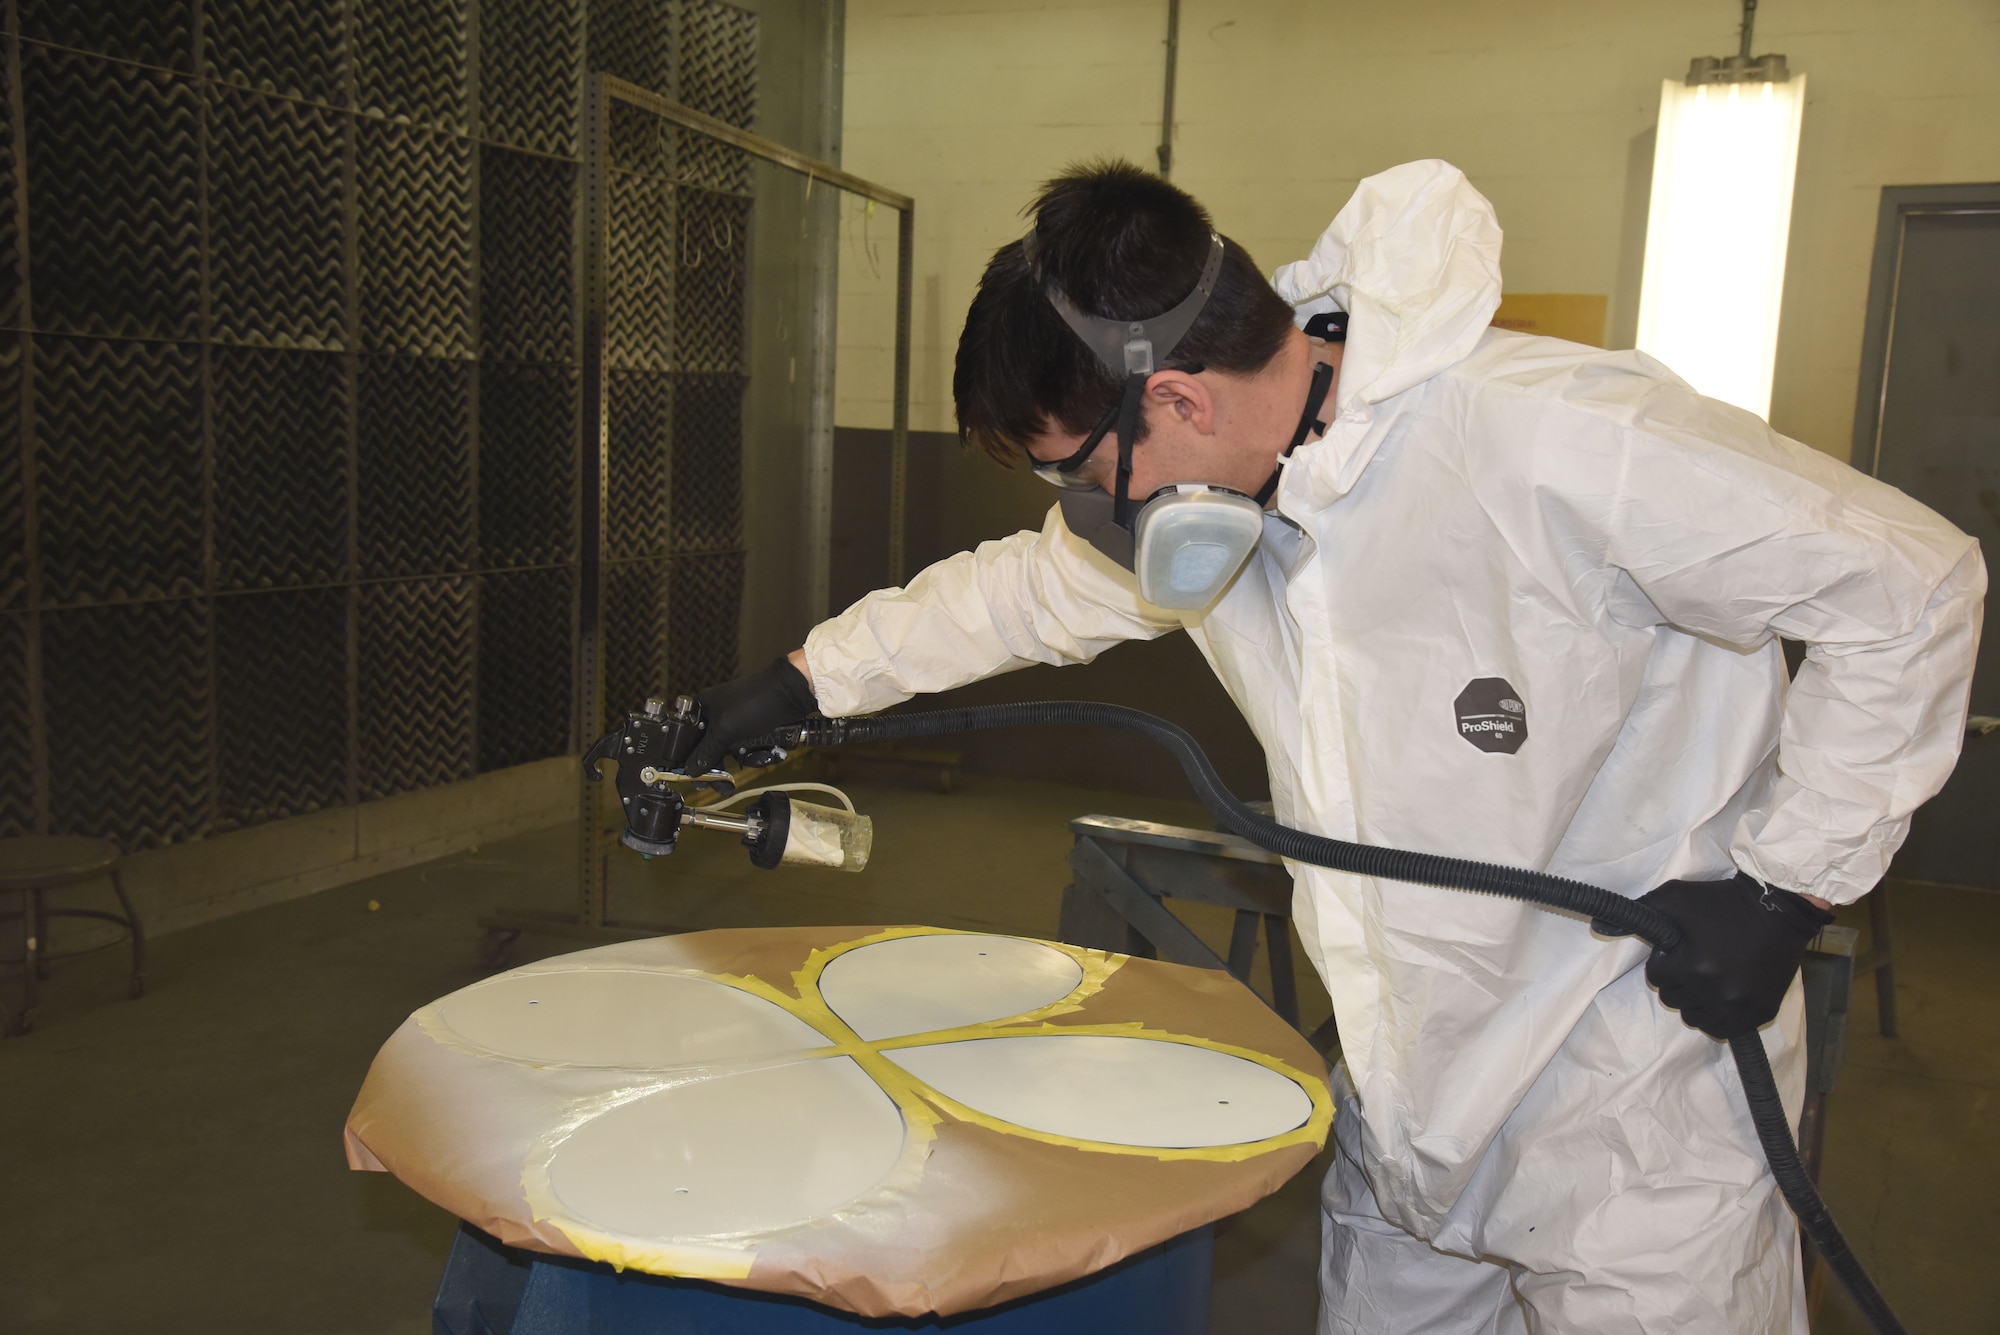 (02/22/2018) -- Museum restoration specialist Casey Simmons paints the wheel covers for the Boeing B-17F Memphis Belle. Plans call for the aircraft to be placed on permanent public display in the WWII Gallery here at the National Museum of the U.S. Air Force on May 17, 2018. (U.S. Air Force photo by Ken LaRock)